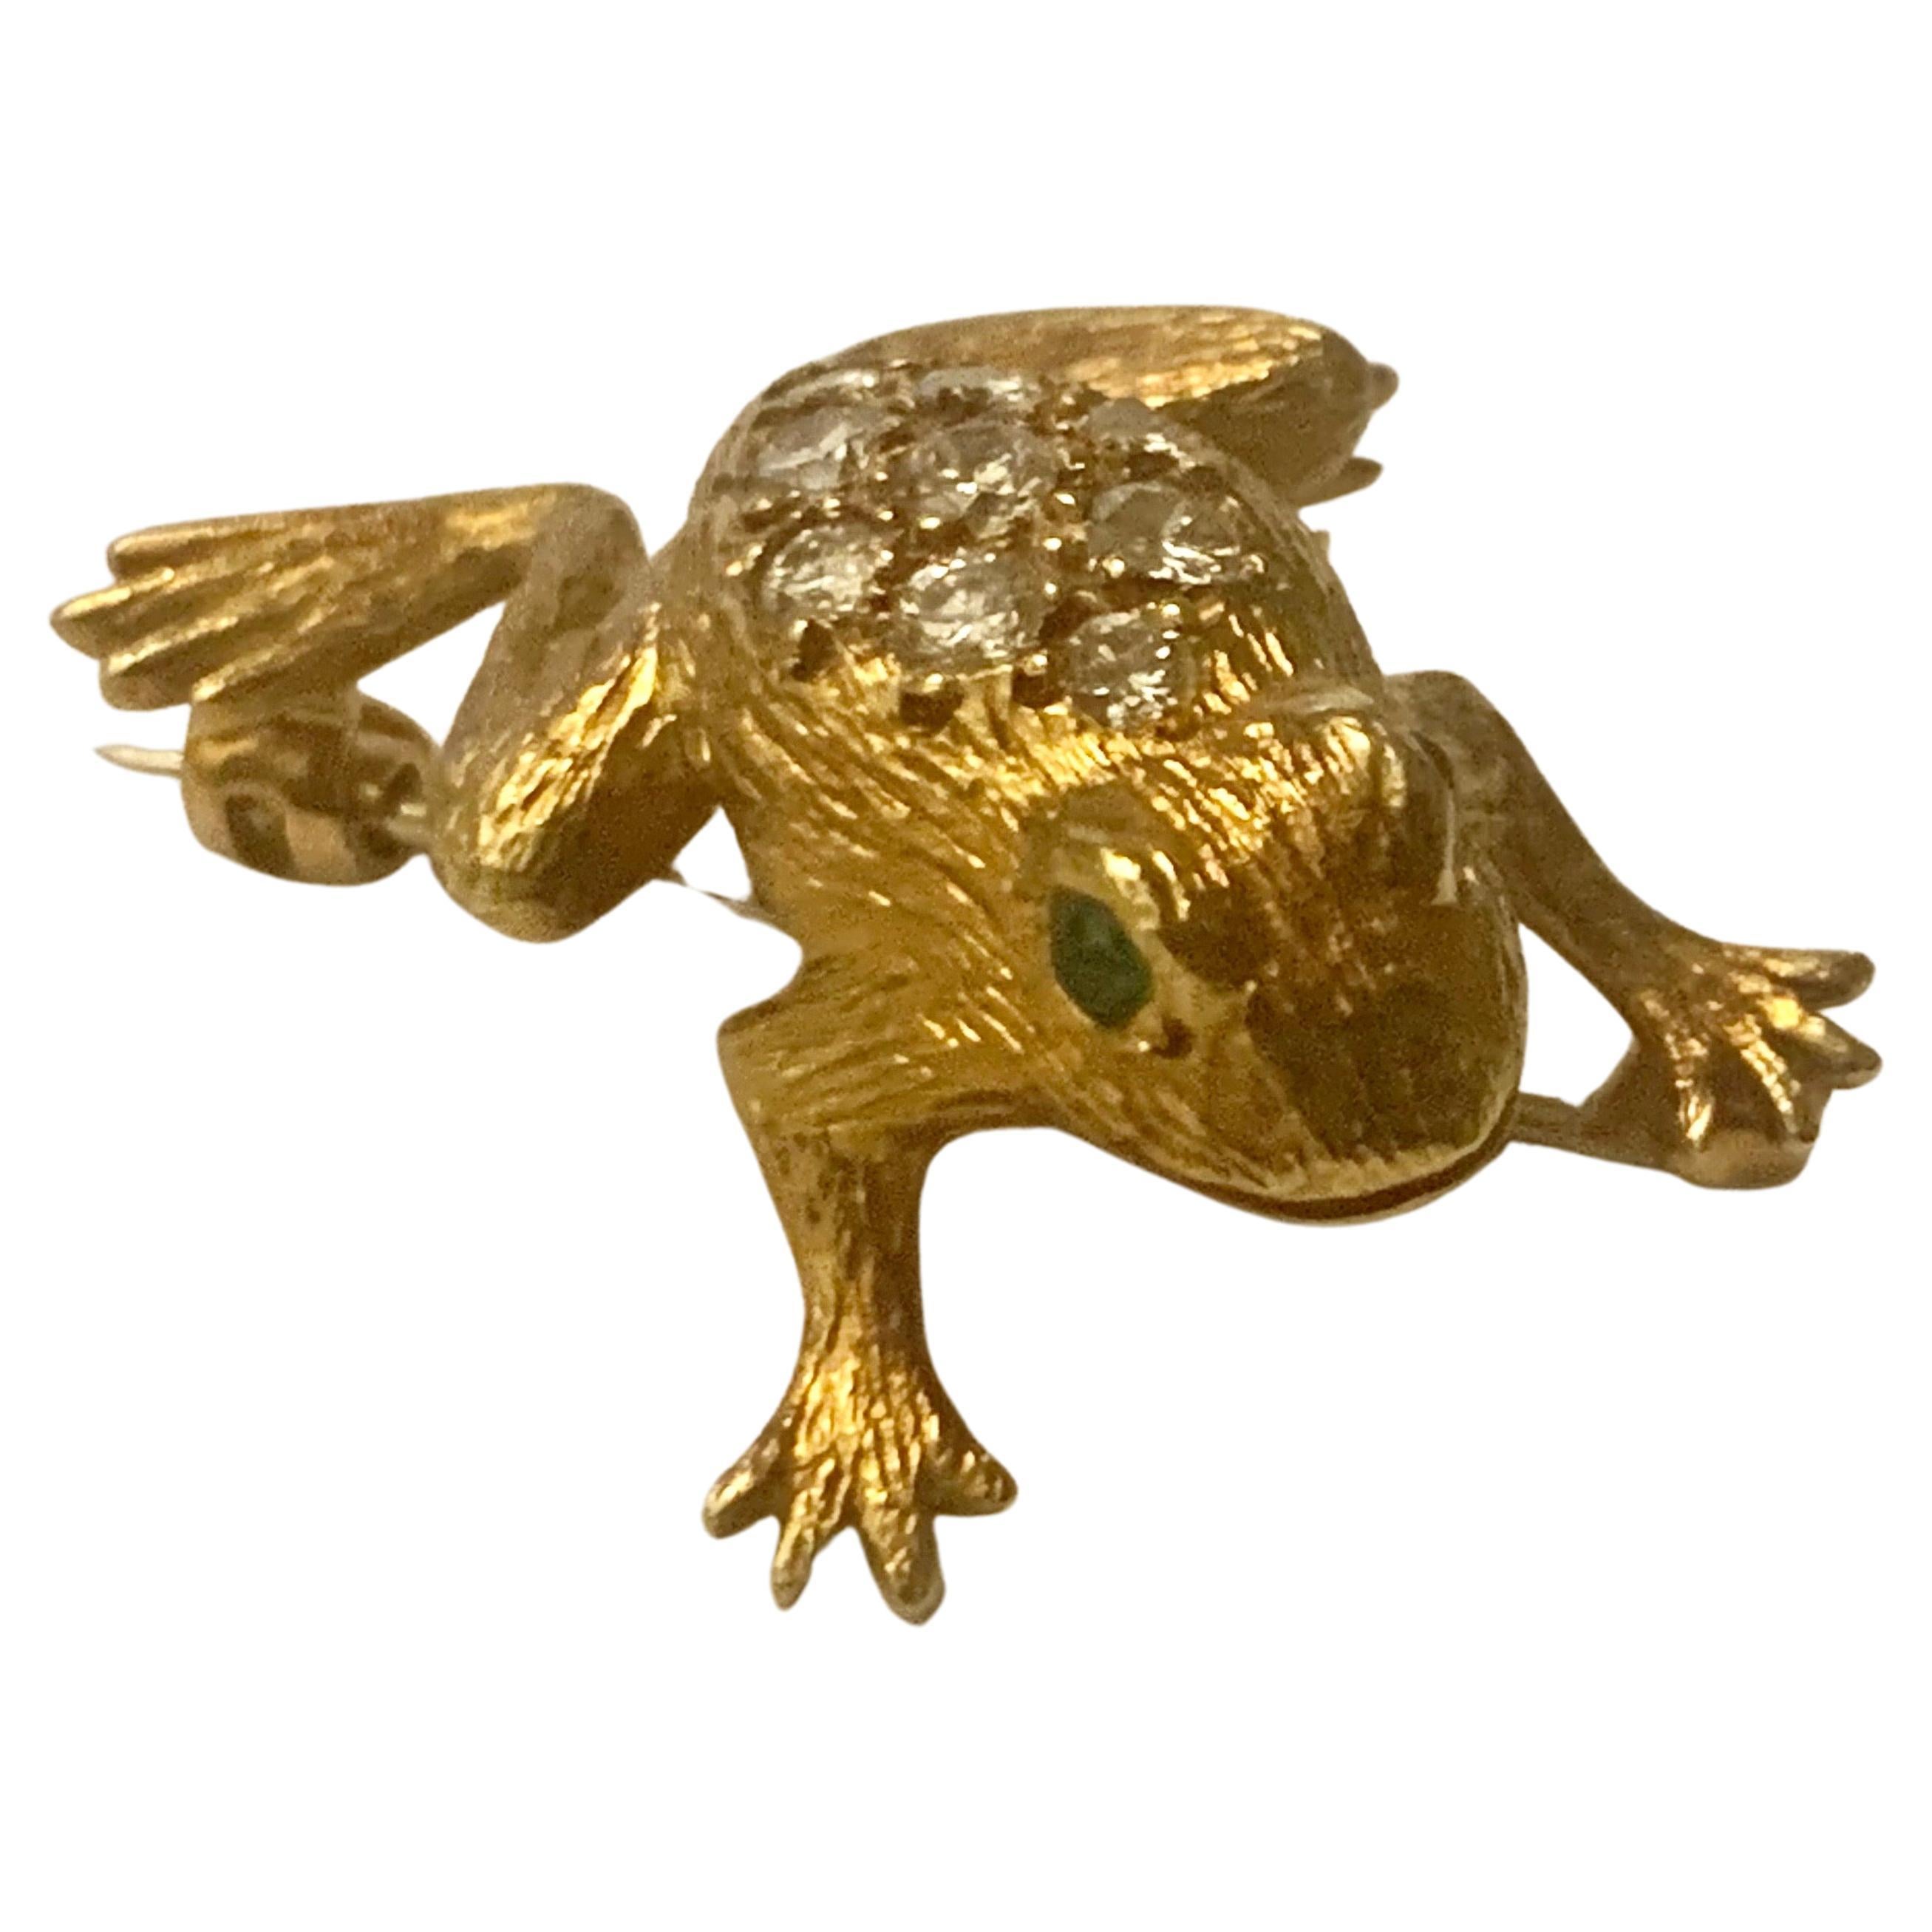 Superb Diamond-Set Frog Brooch, by E. Wolfe & Co. Retailed by Asprey's